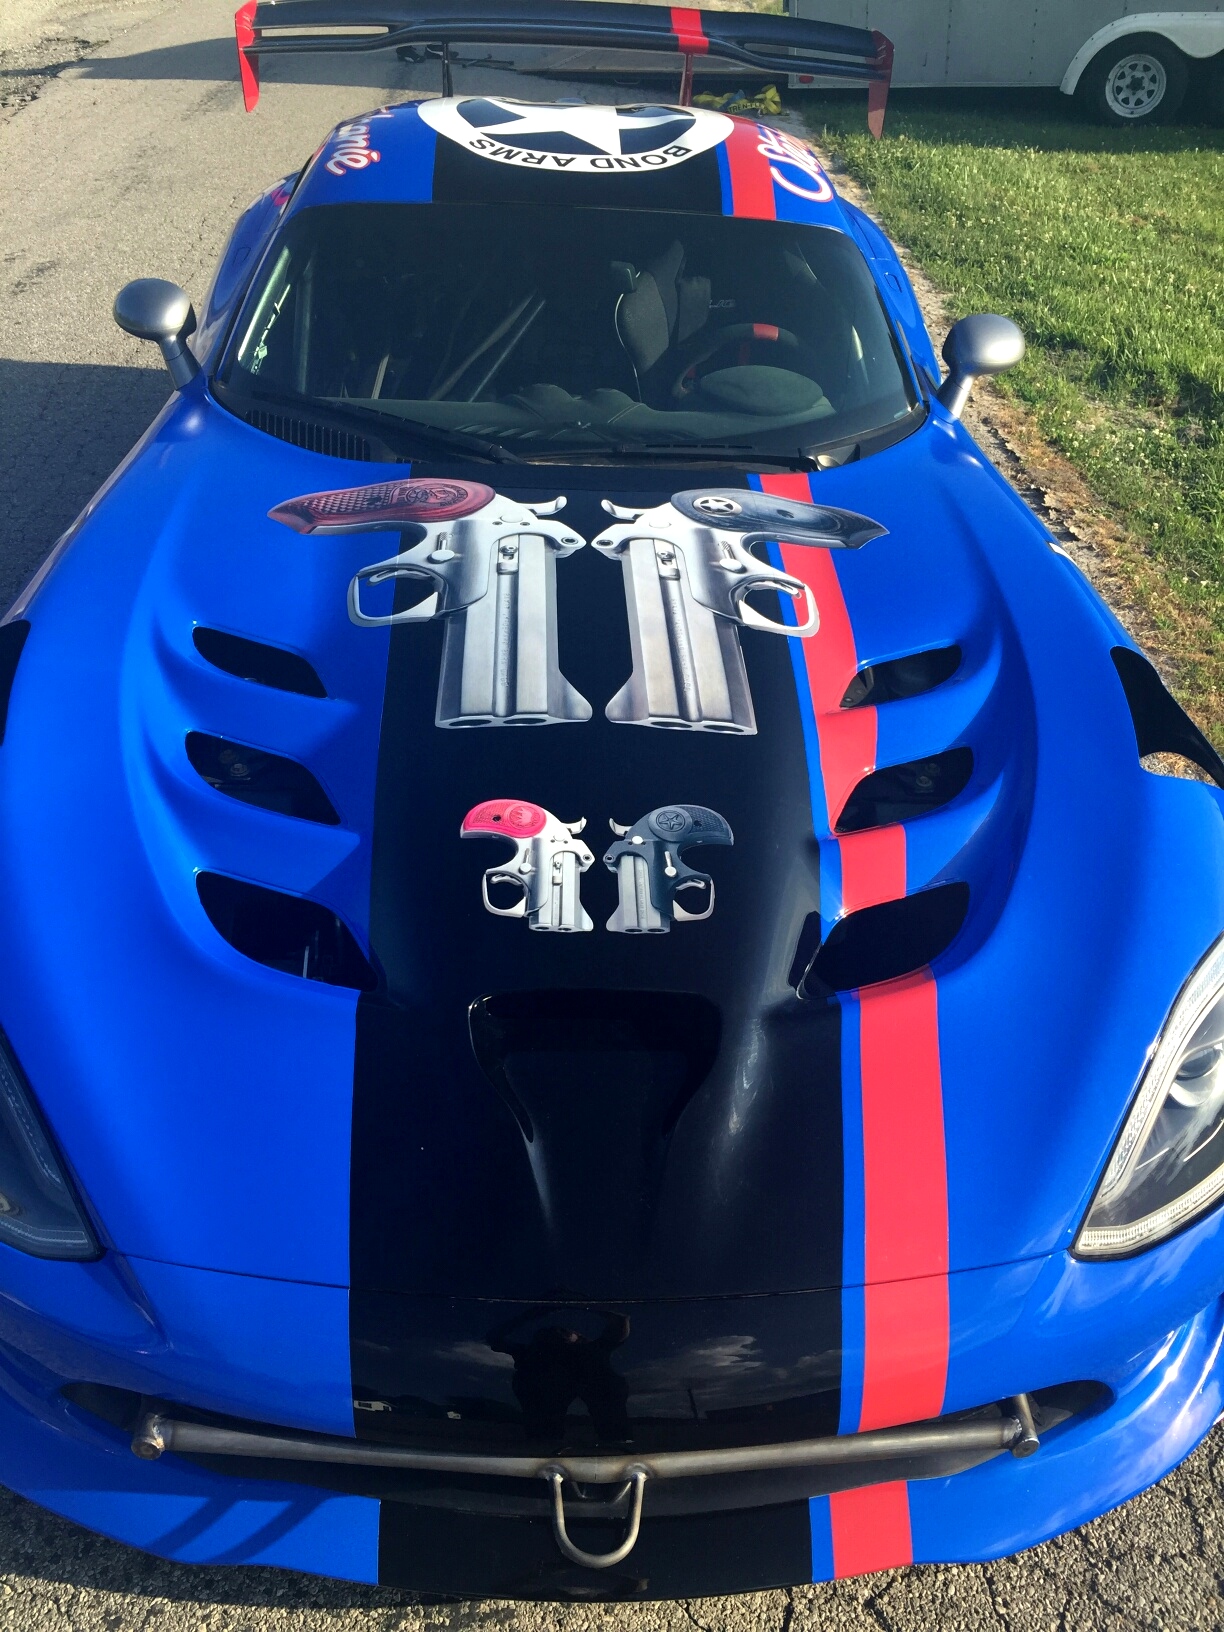 2016 Dodge Viper ACR, Car #8 In Pike Peaks 100th Anniversary Race, Driven By Stephanie Reaves, Showing Bond Arms Dillinger-Style Hood Graphics Sponsored By BondArms.com